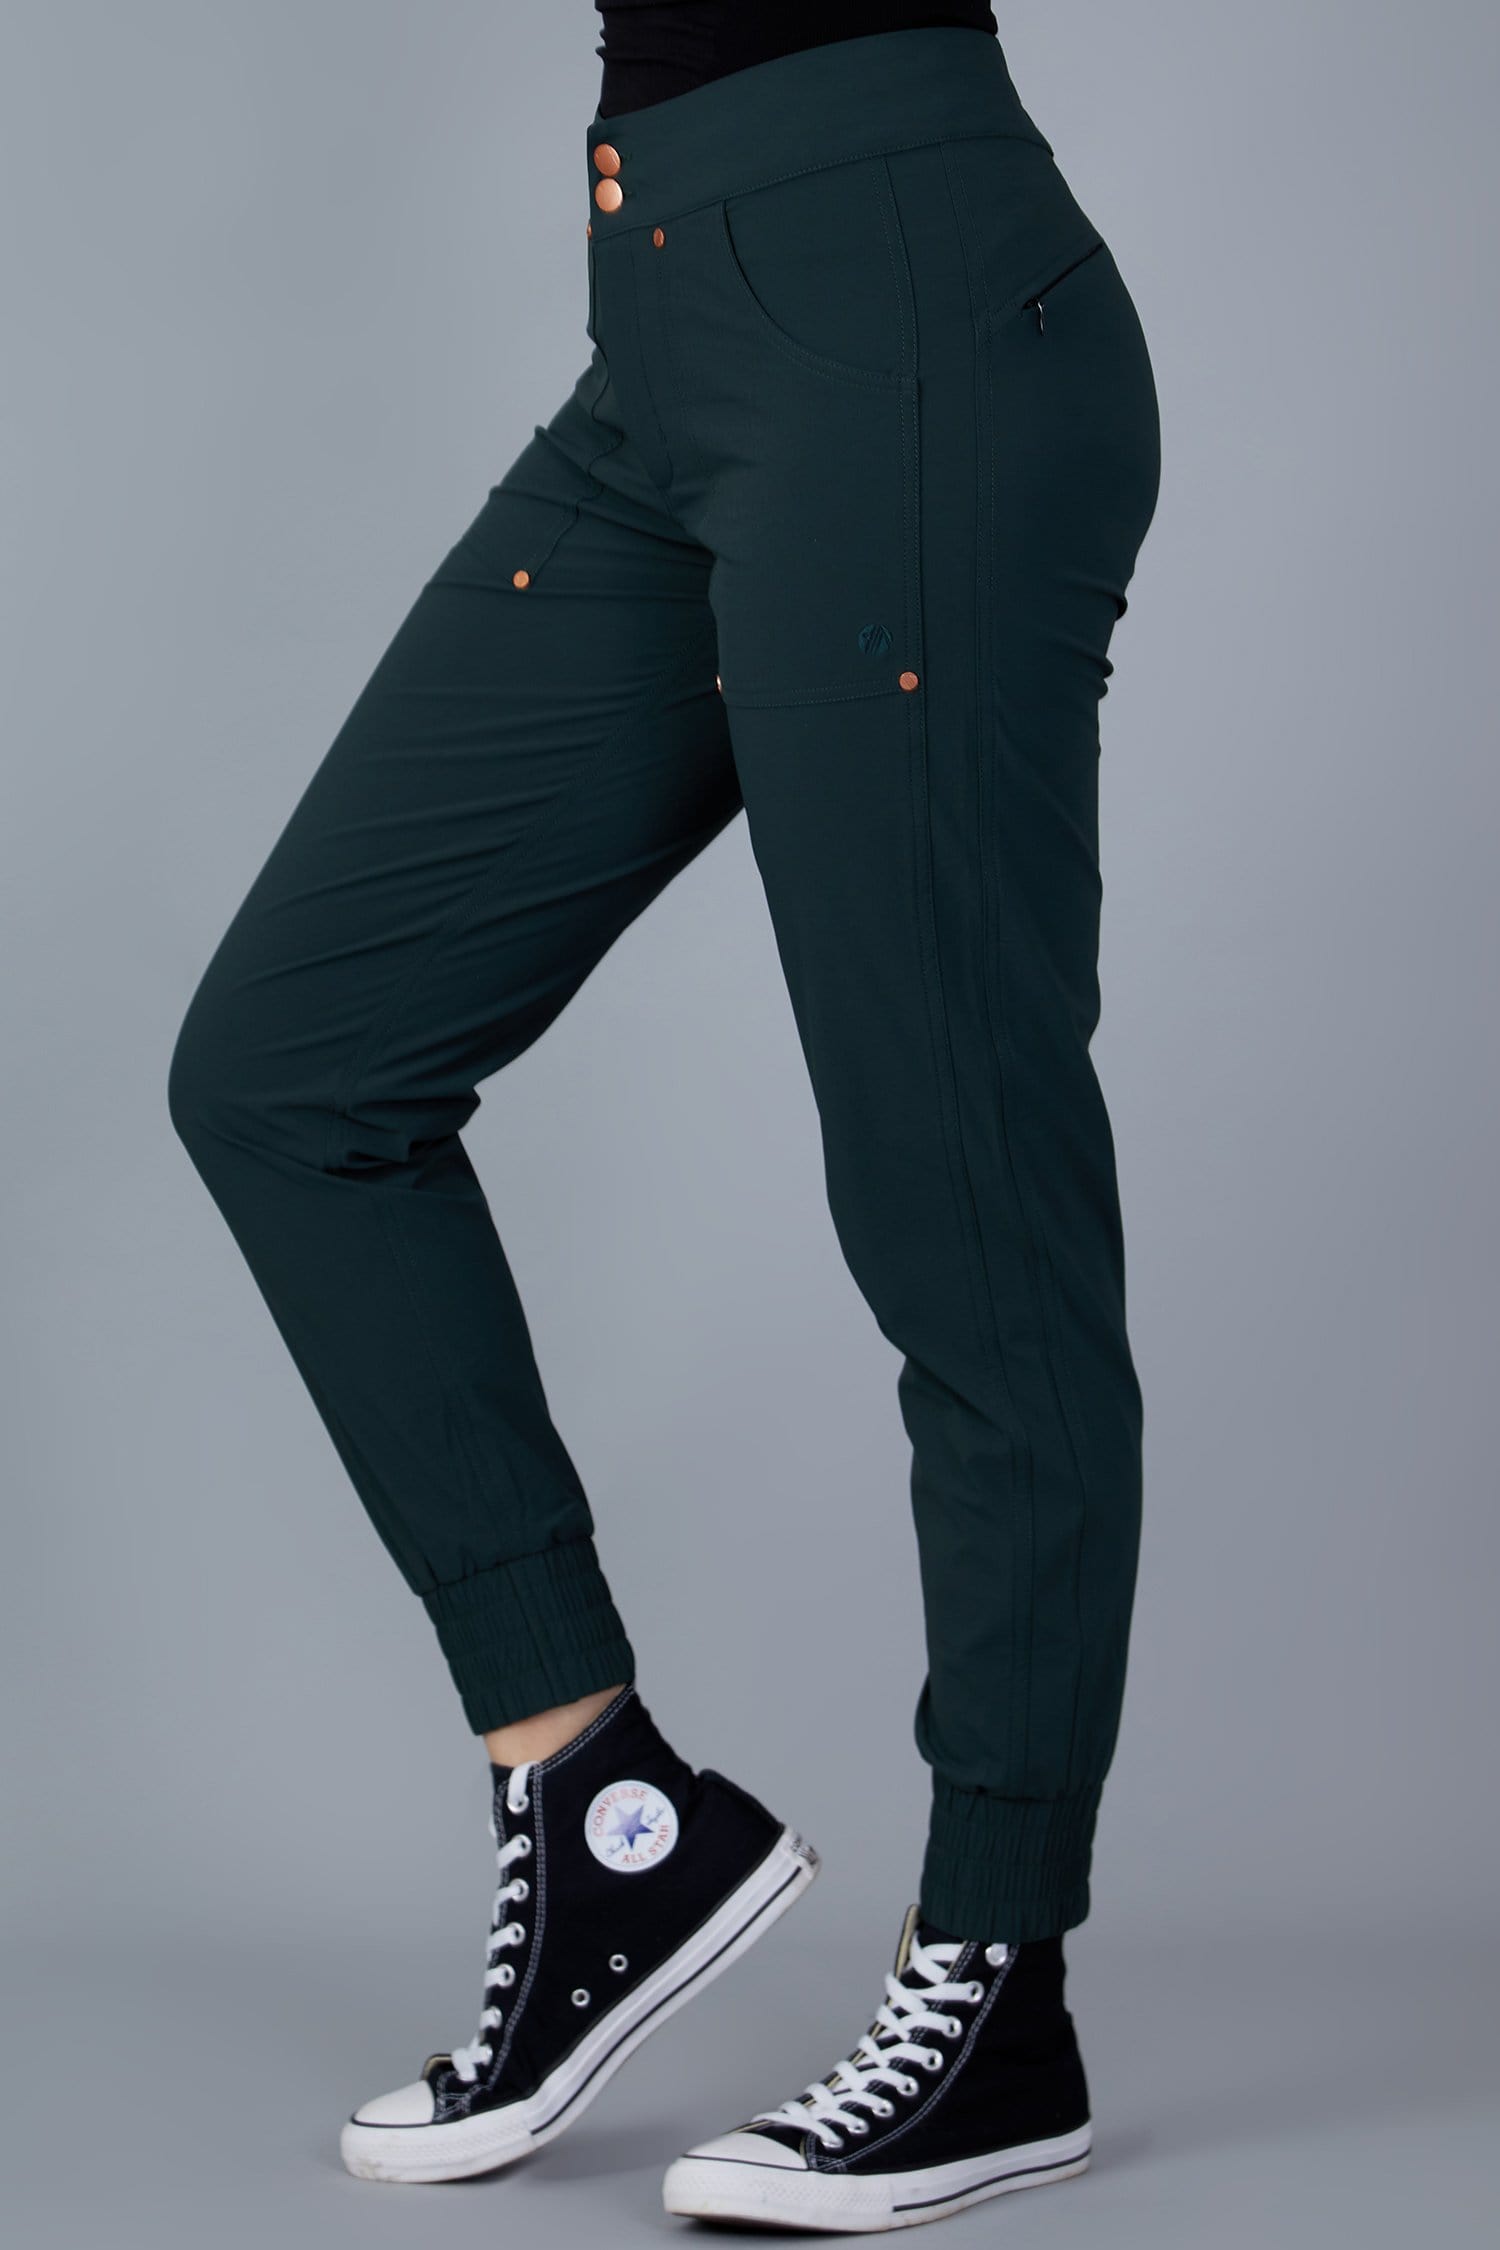 Casual Stroll Pants - Forest Green - 26r / Uk8 - Womens - Acai Outdoorwear